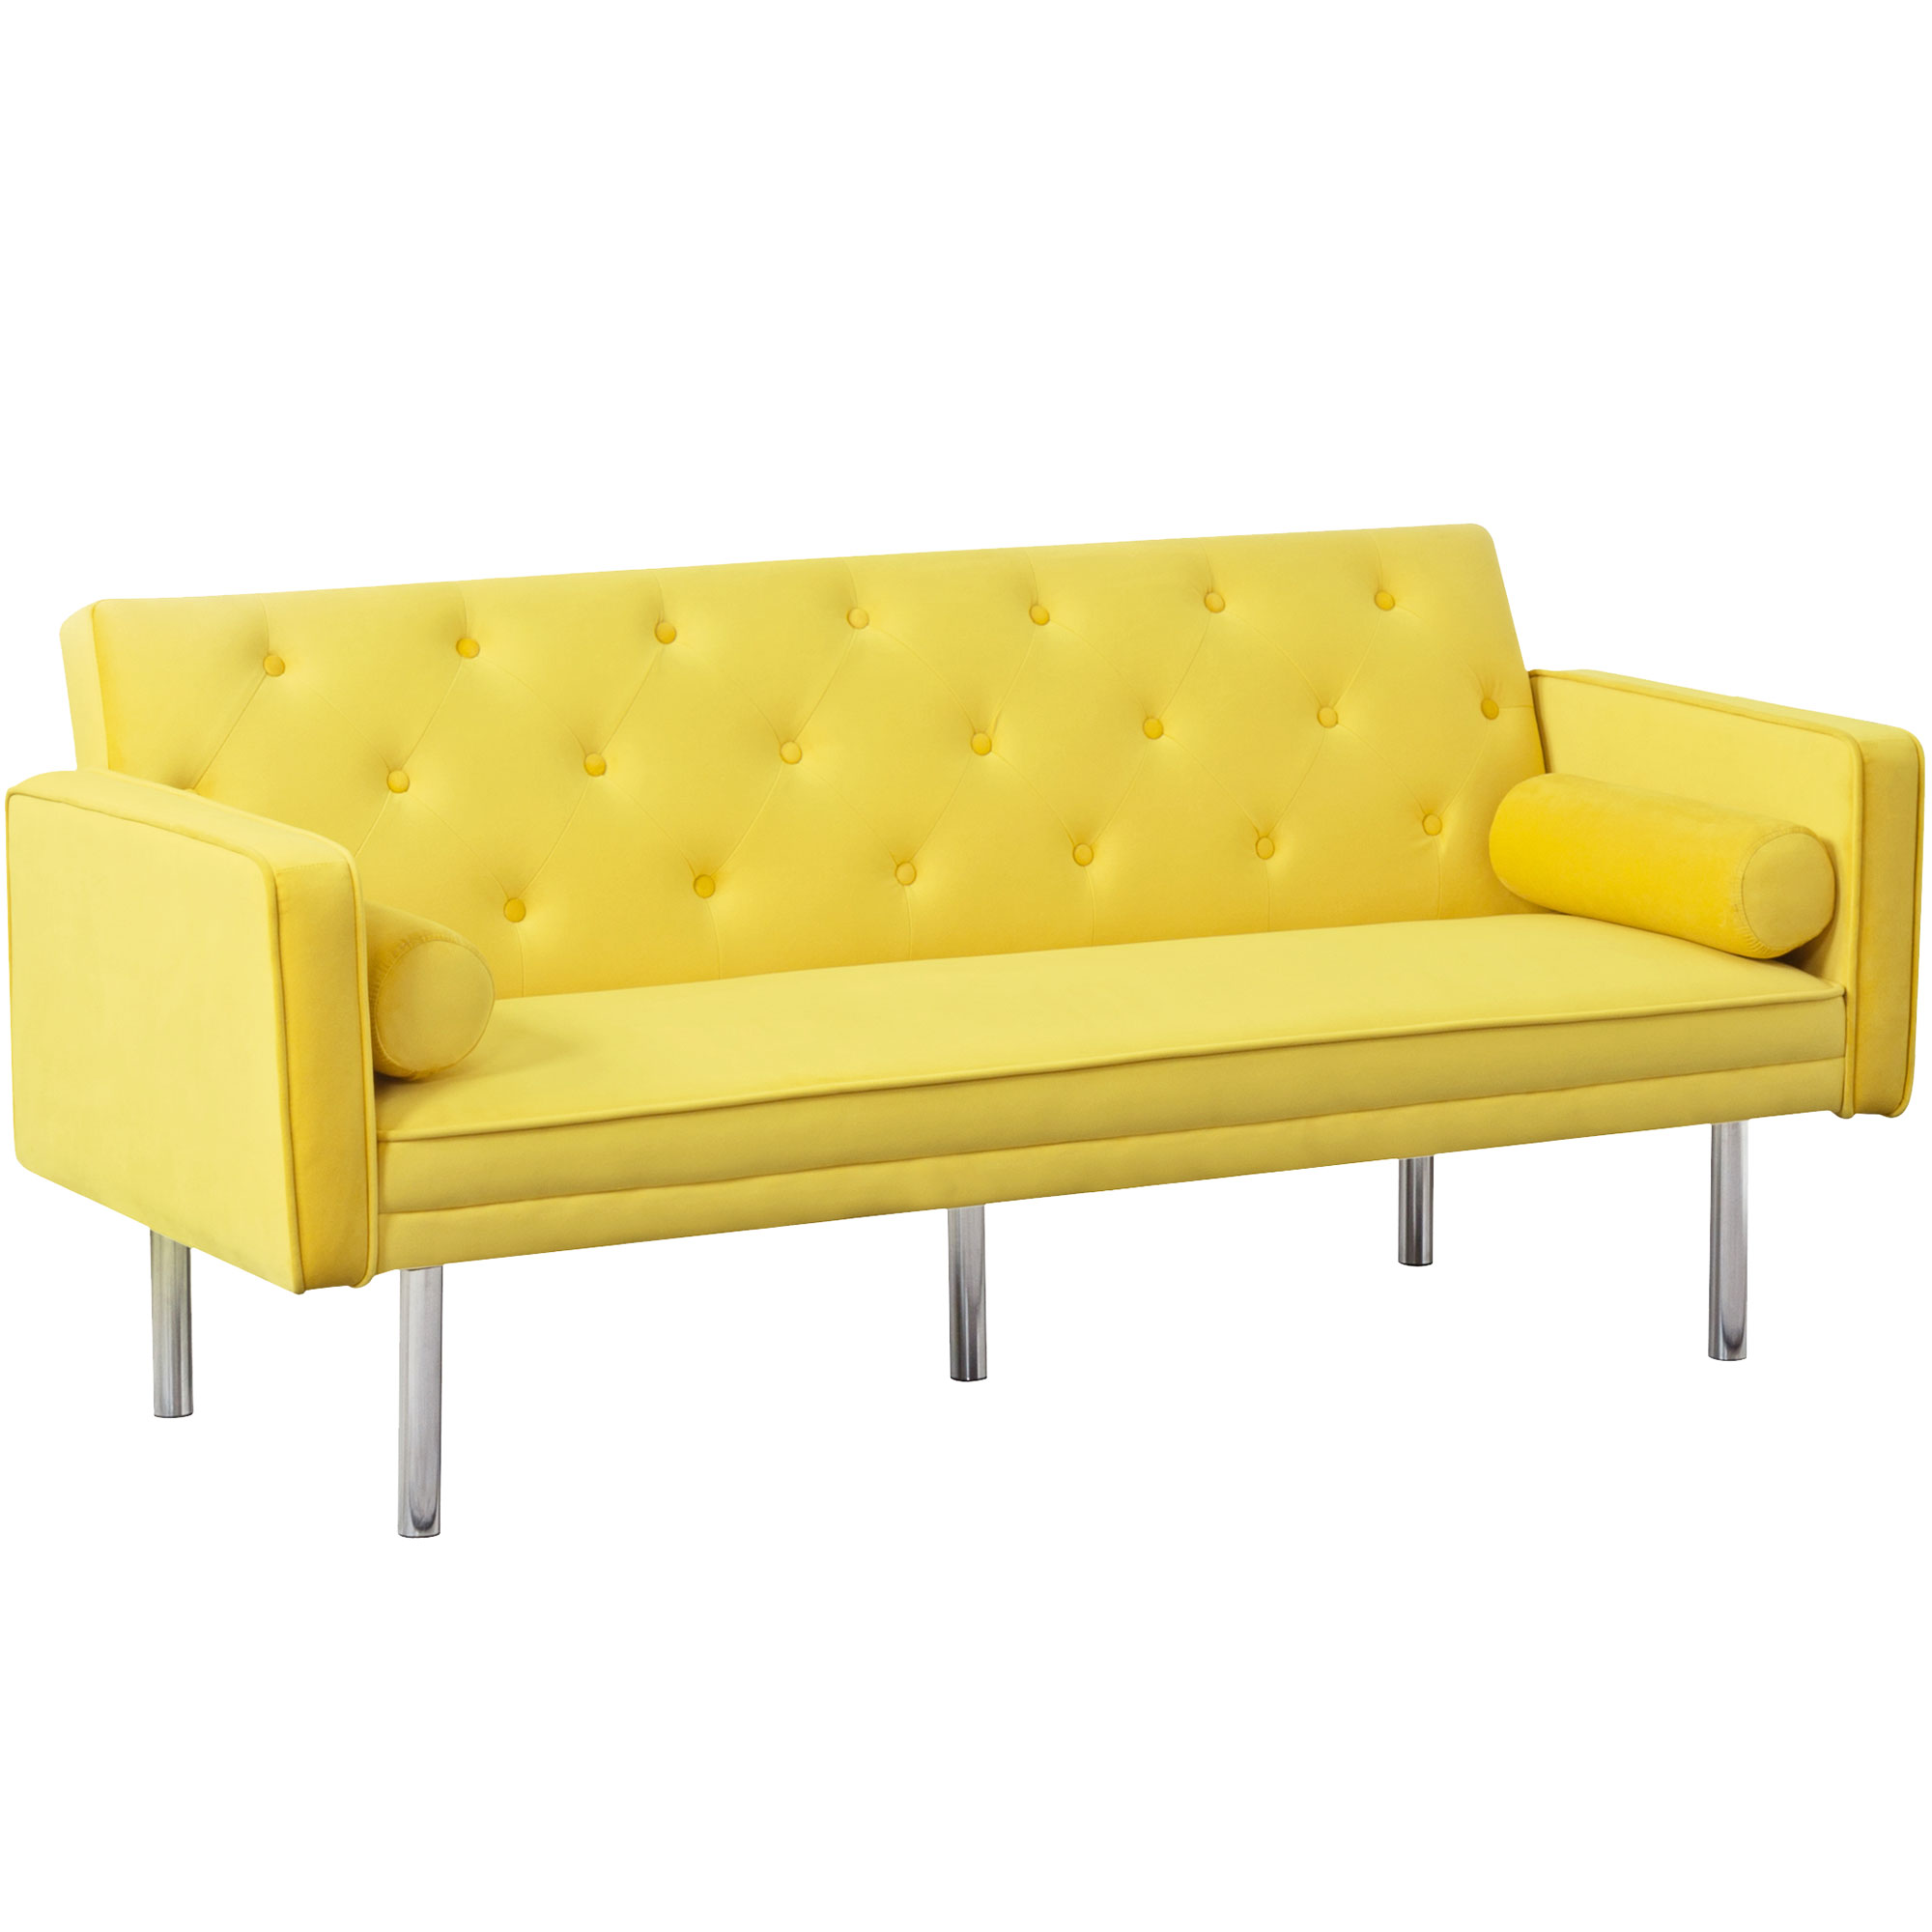 Modstyle Futon Sofa Bed, Velvet Convertible Sleeper Sofa with Pillows, Yellow - image 1 of 8